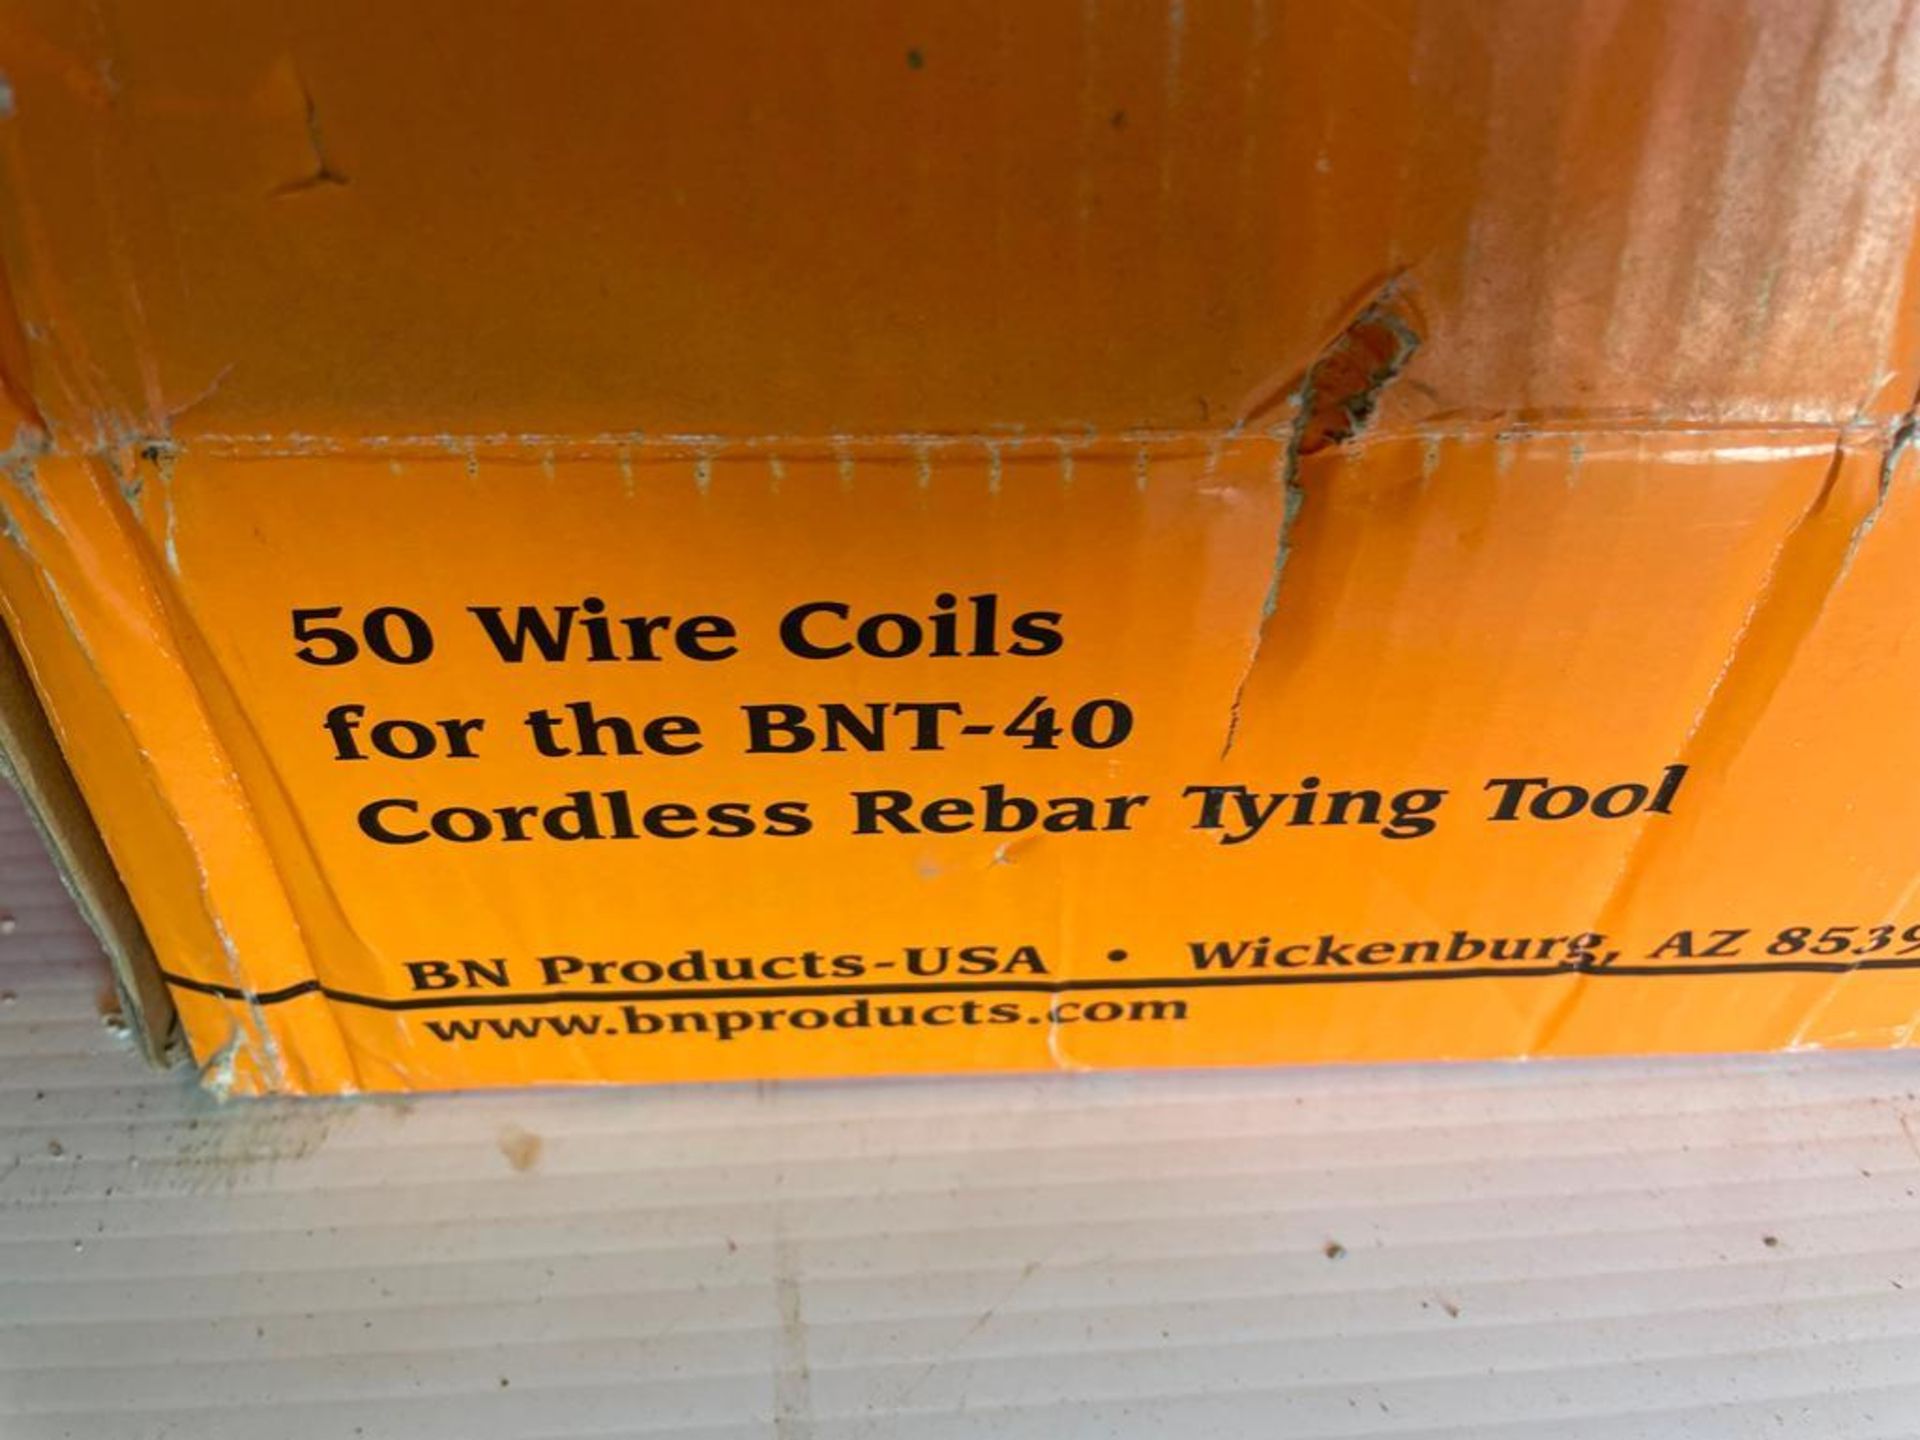 (34) Rolls of 50 Wire Coils for BNT-40 Cordless Rebar Tying Tool. Located in Hazelwood, MO - Image 2 of 2